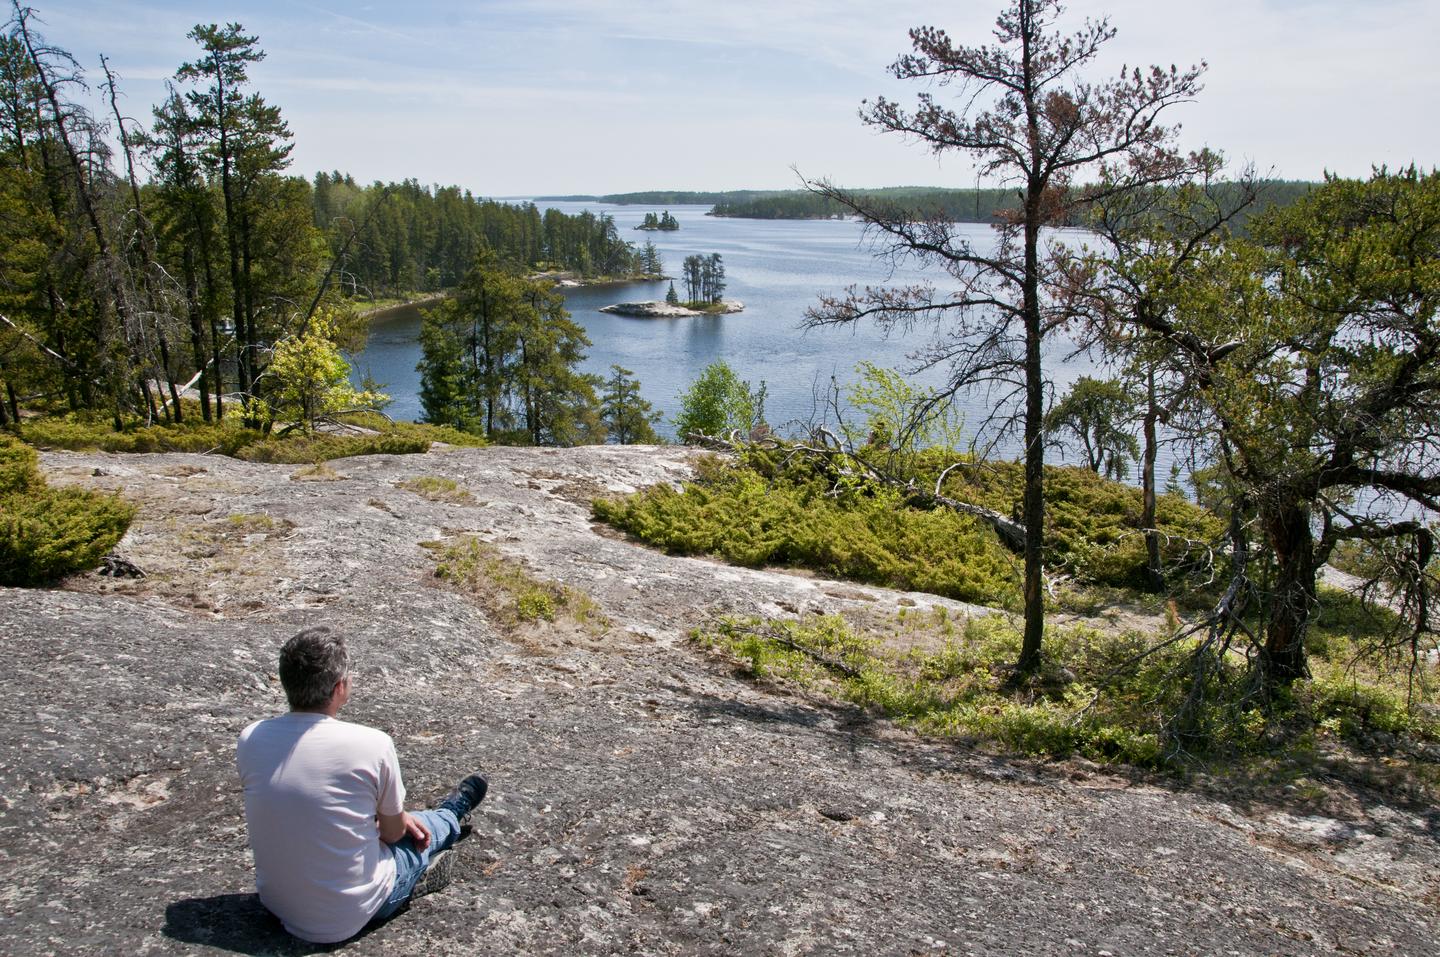 A sits atop a granite overlook enjoying the lake view belowA man enjoys the view from the Anderson Bay overlook 